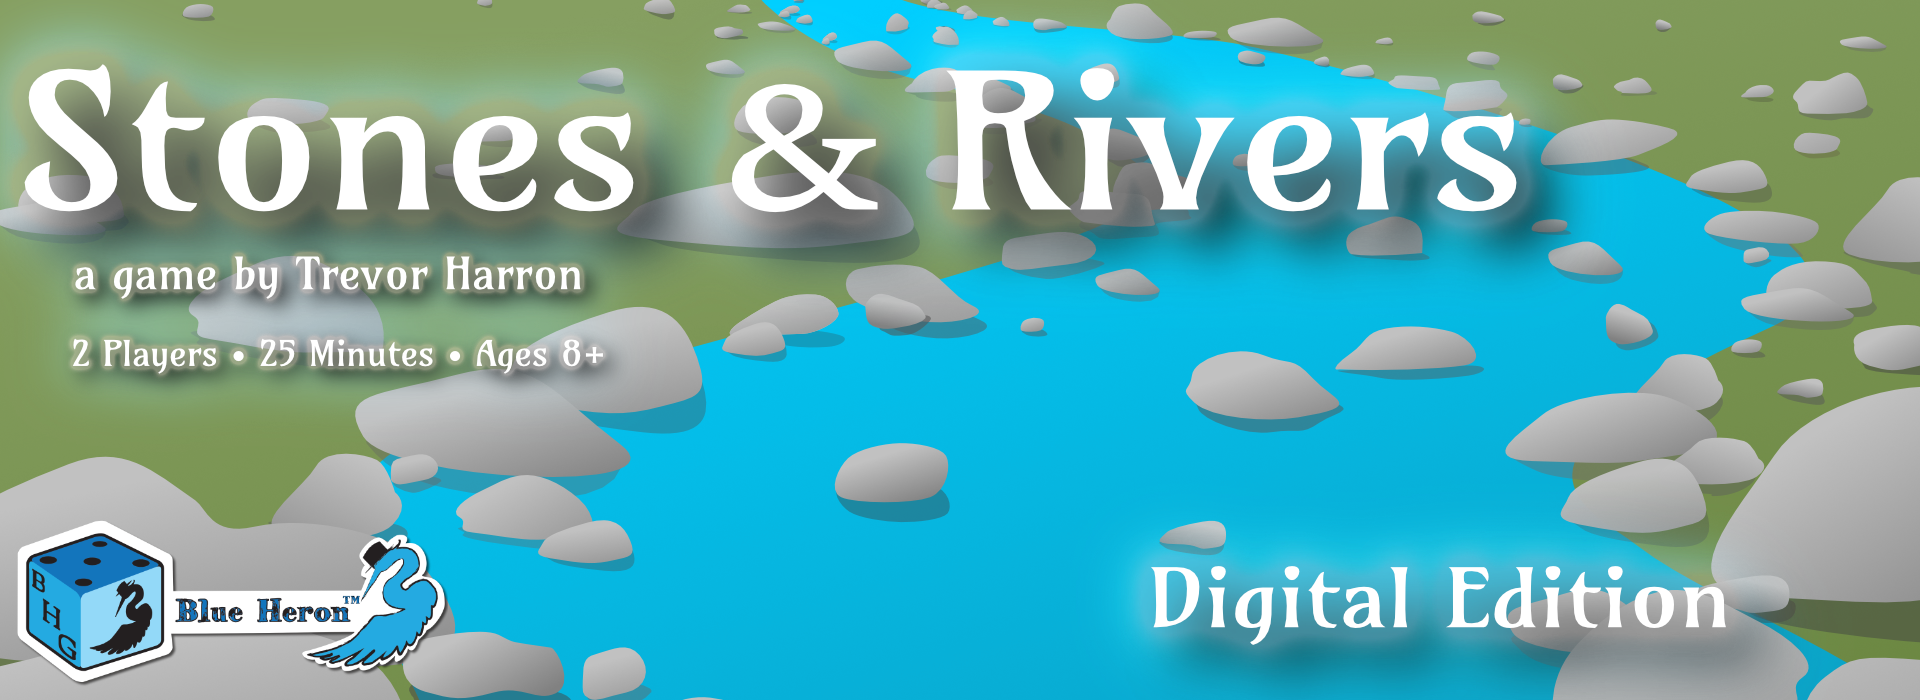 Stones and Rivers Digital Game